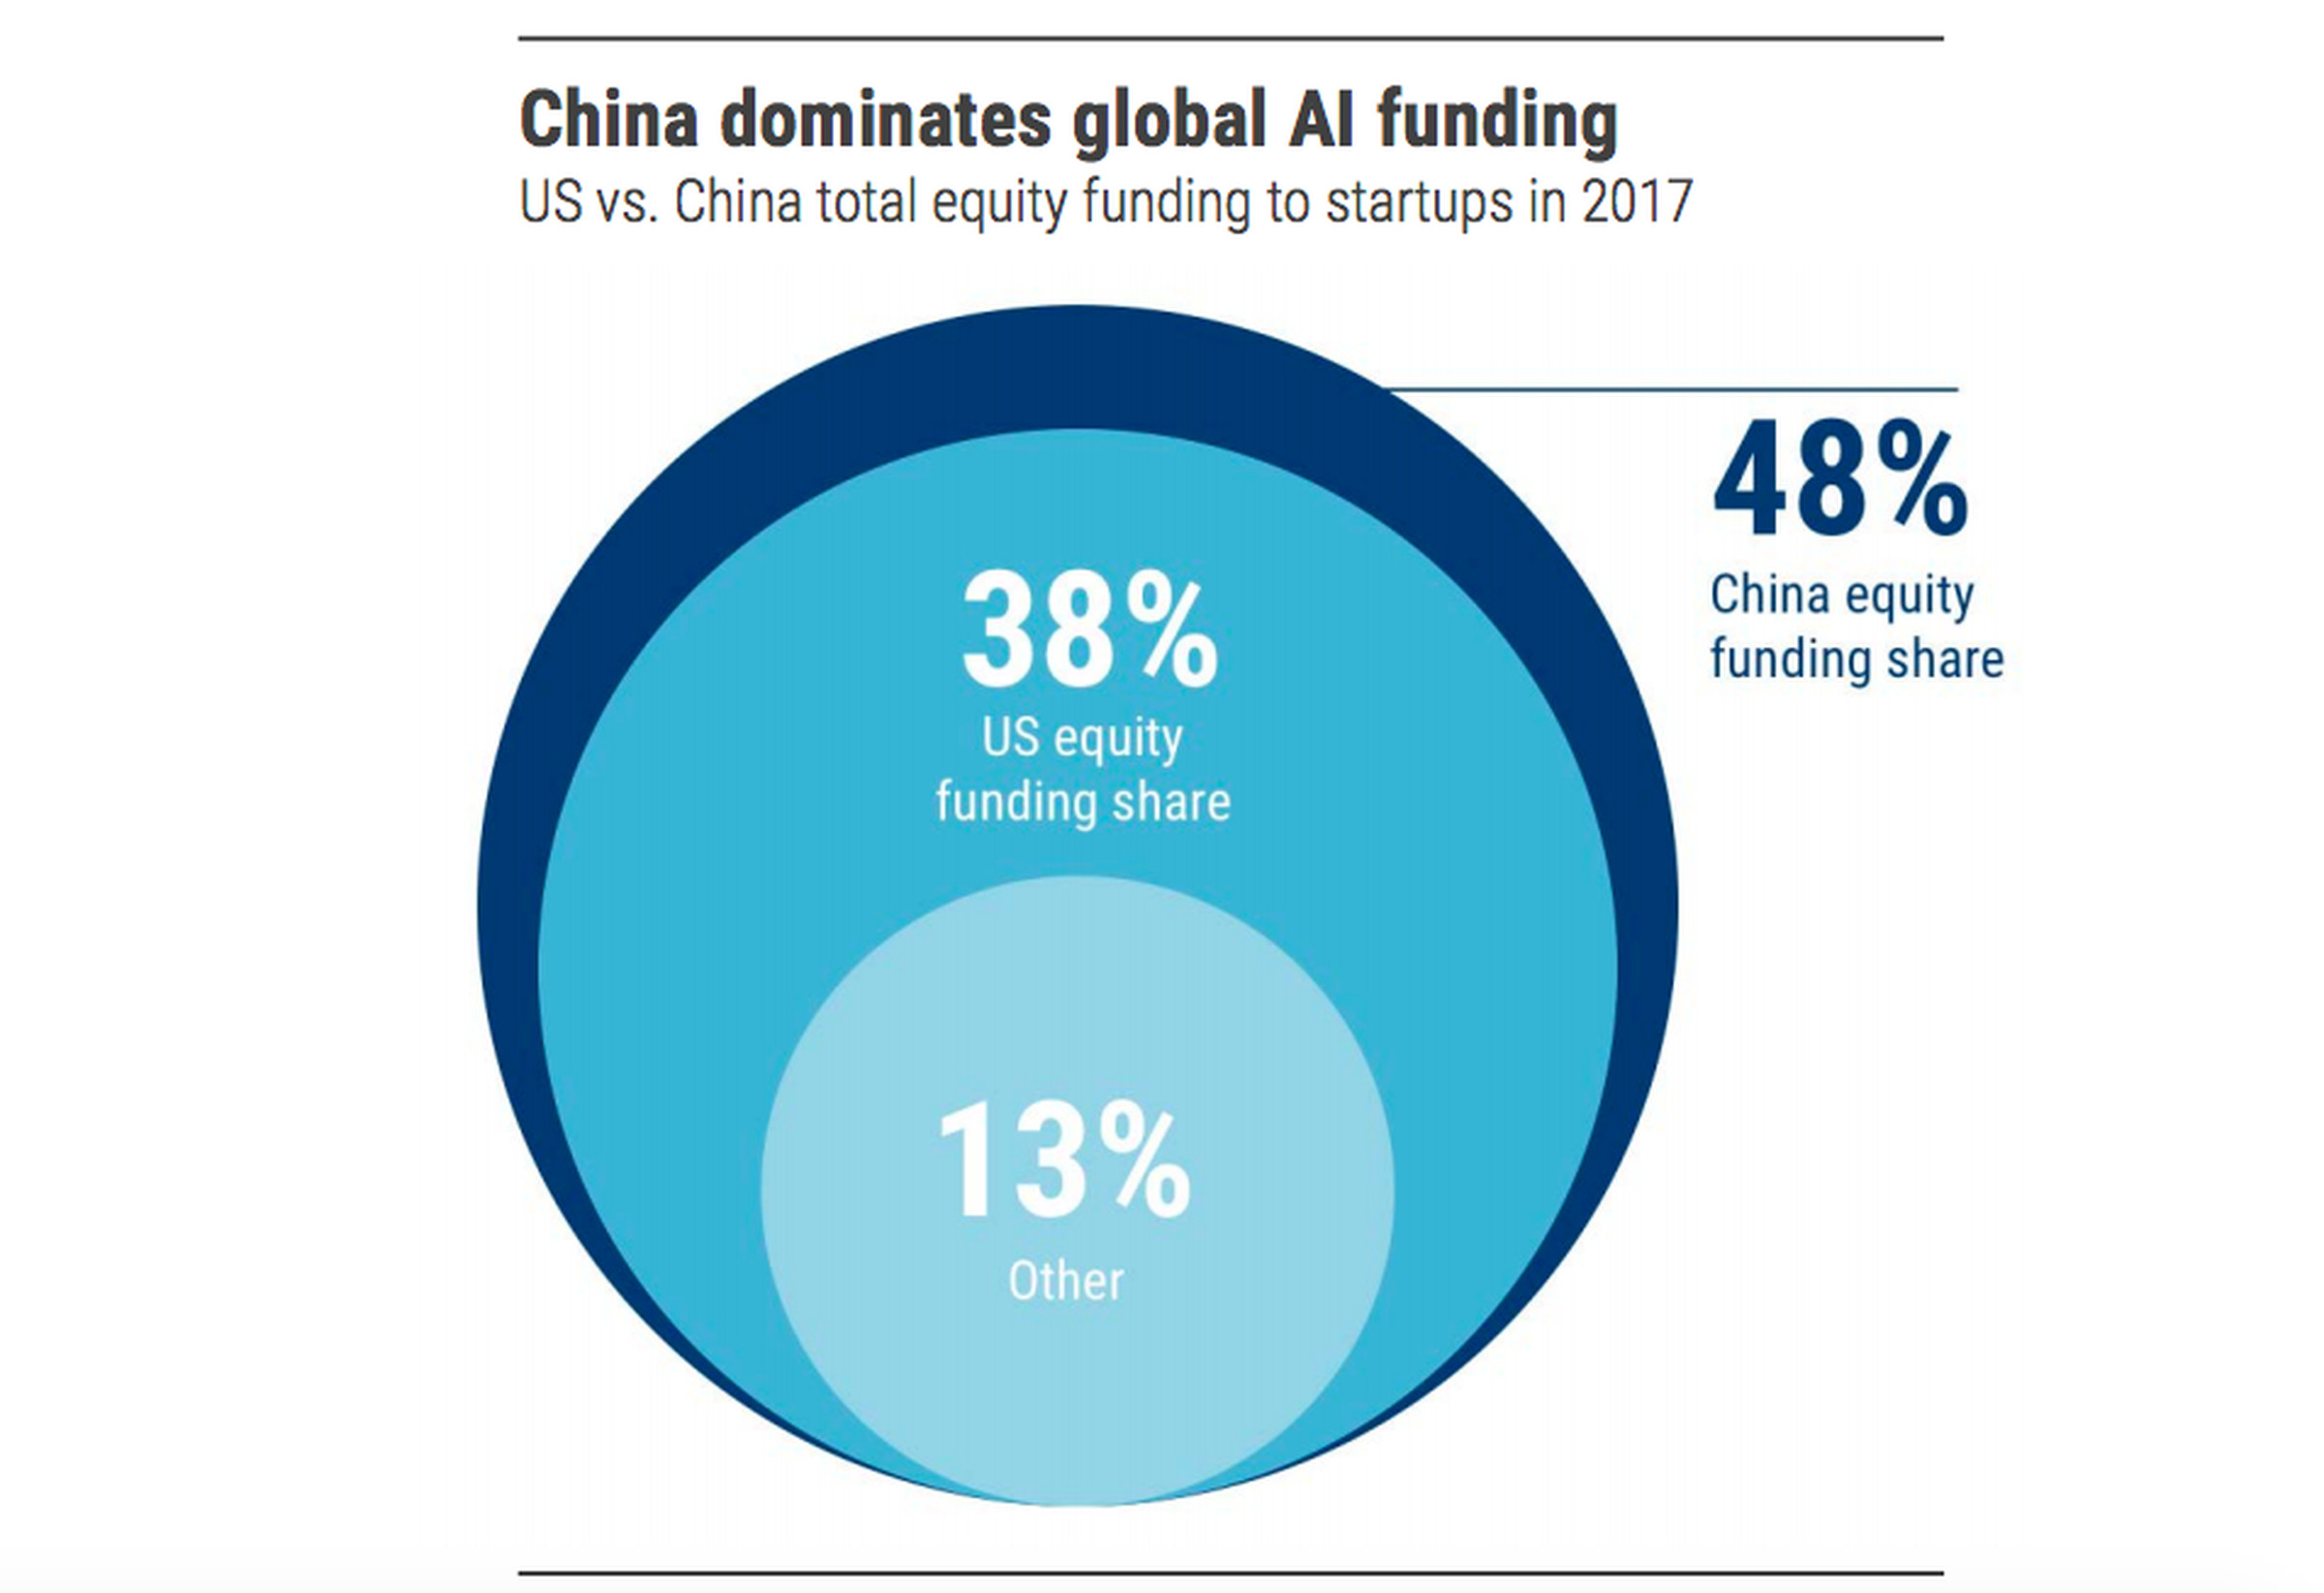 China’s proportion of global AI startup funding as a percentage of dollar value.